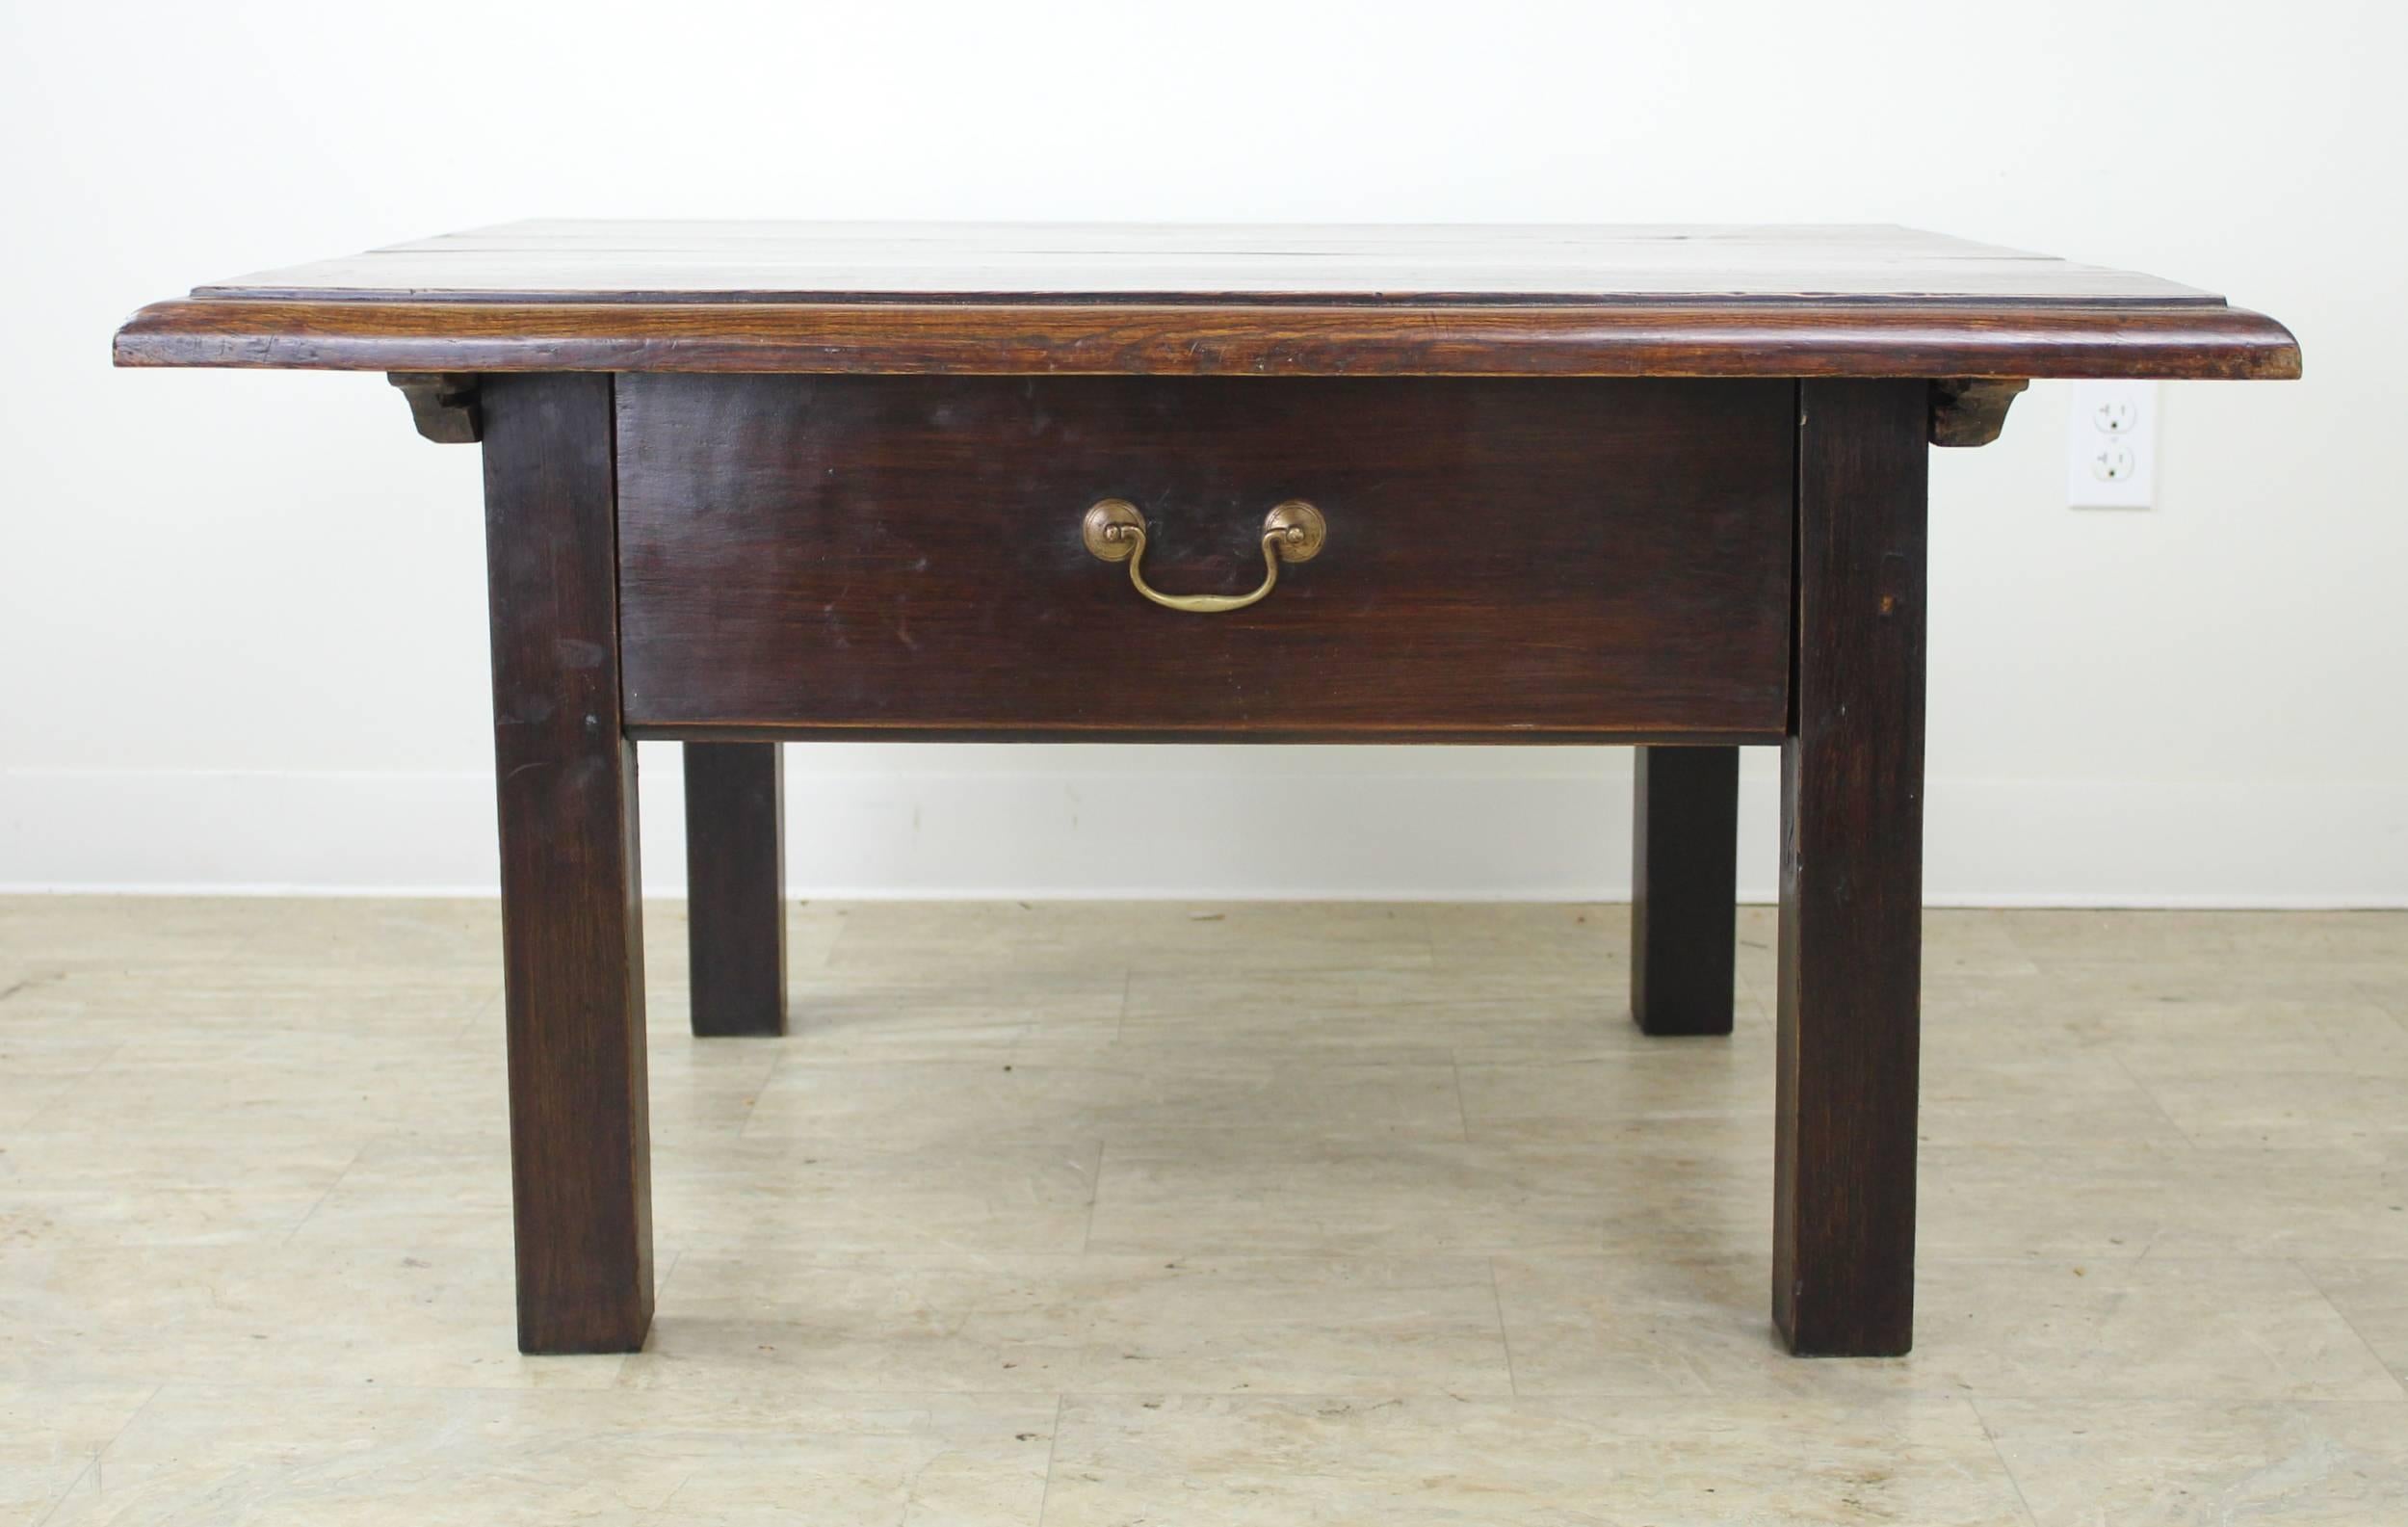 A dark elm coffee table with rich color, good patina, and a twist. This coffee table has a floating top that slides back and forth to reveal a secret compartment. Perfect for hiding valuables! The facade of the compartment has a brass escutcheon